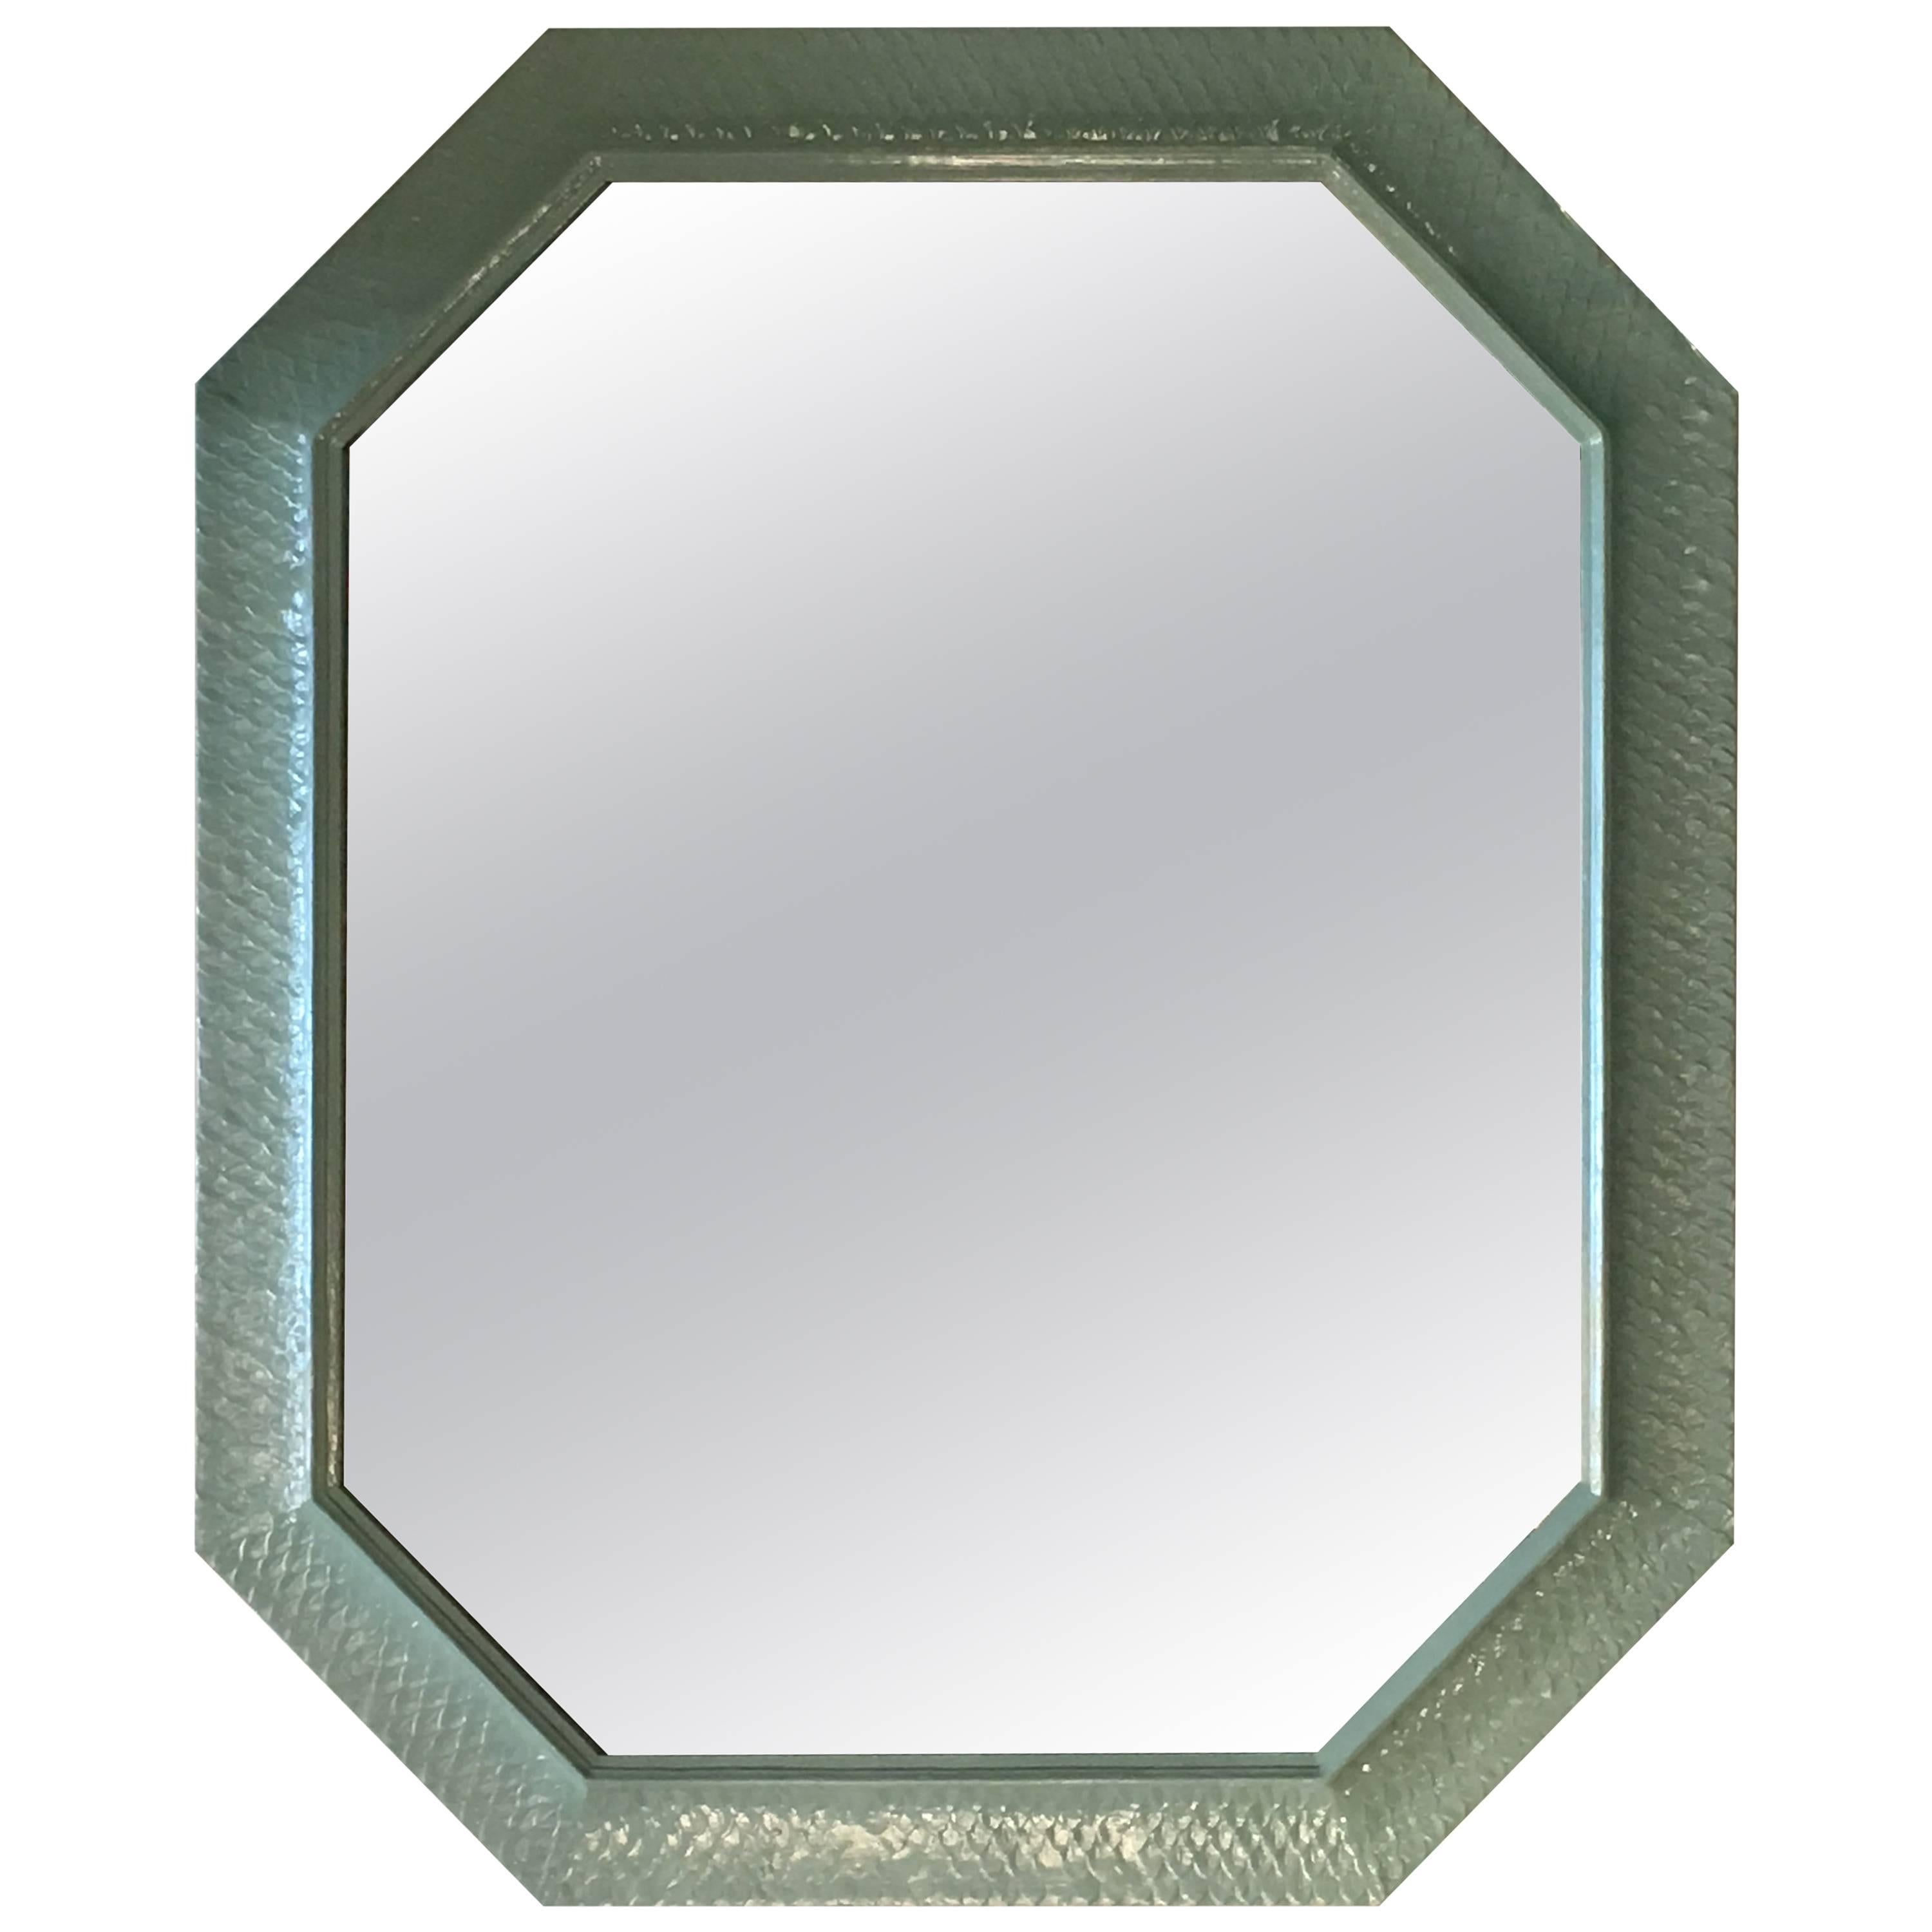 Vintage Wall Mirror Lacquered Palm Beach Green Large